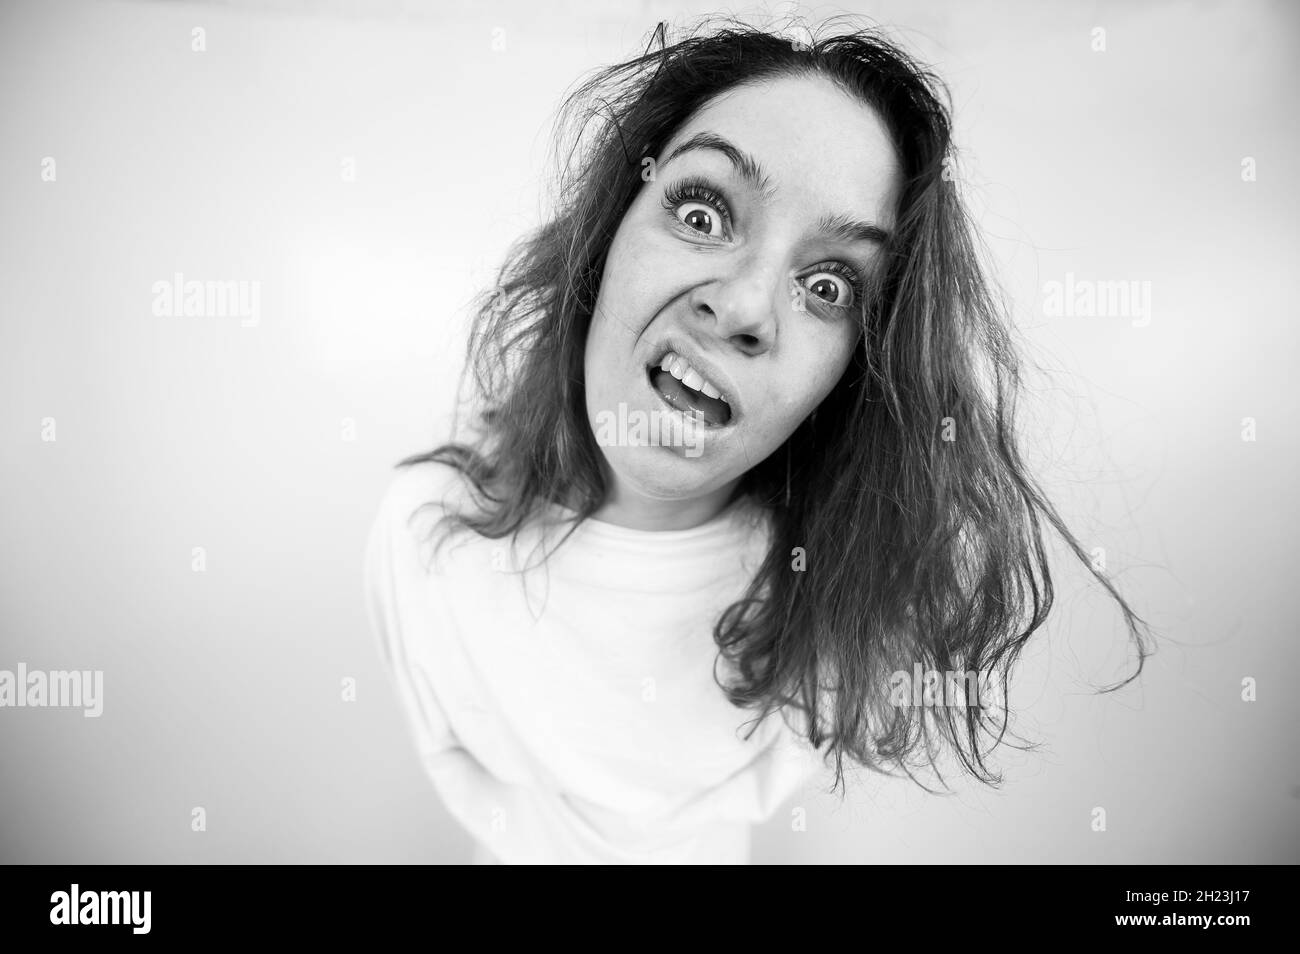 Close-up portrait of insane woman in straitjacket on white background. Monochrome. Stock Photo